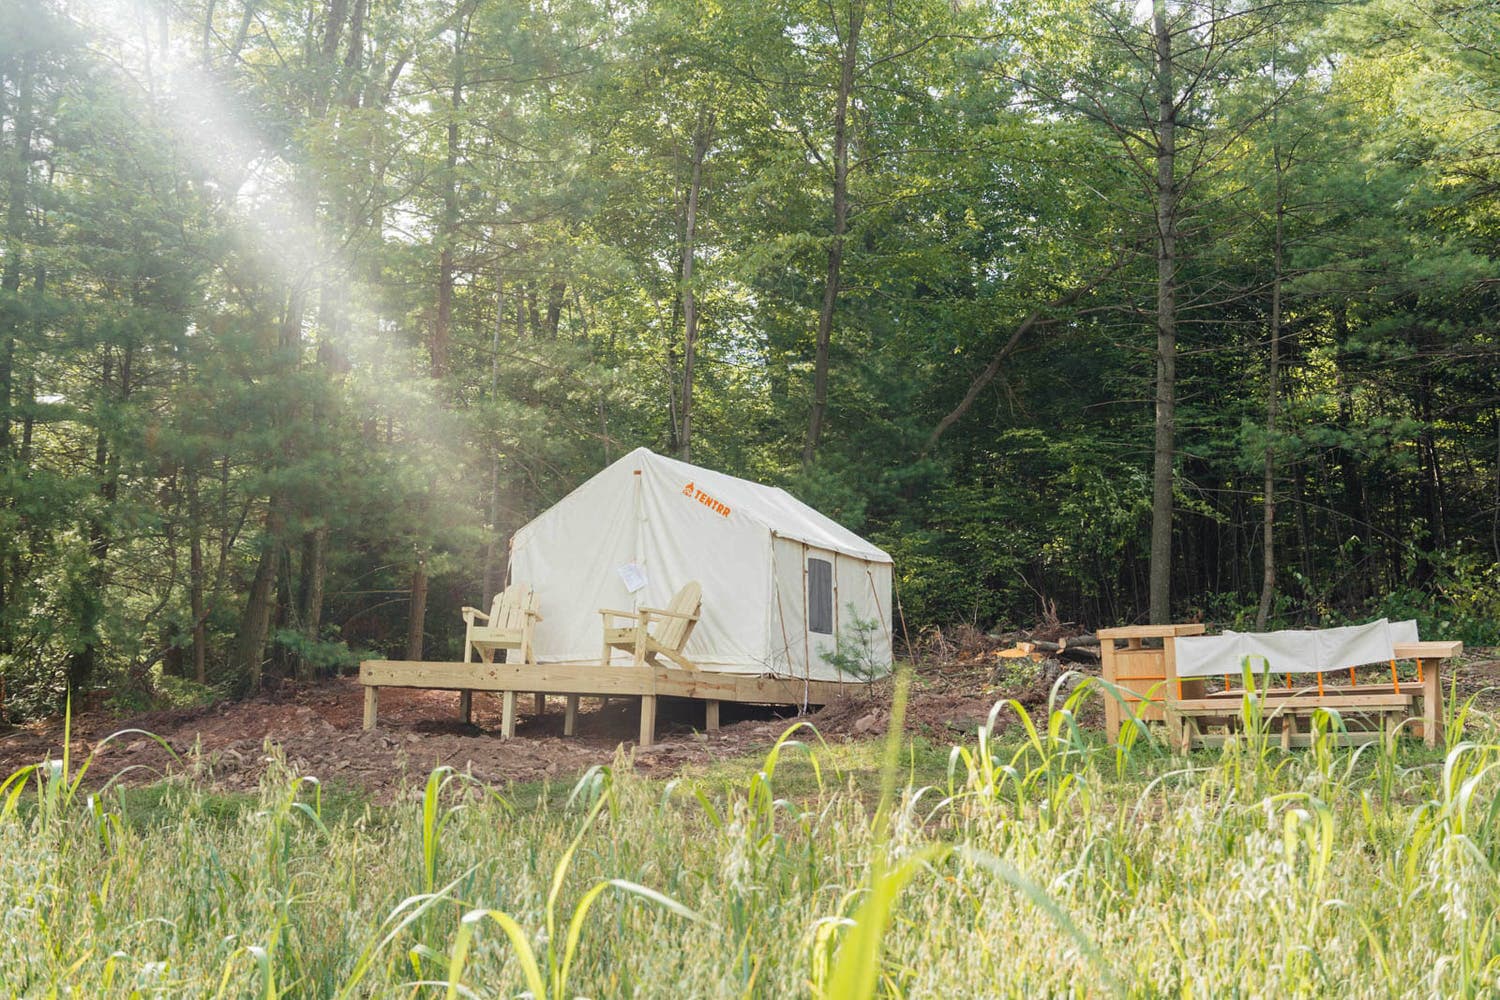 The Best of Glamping and Camping in Pennsylvania